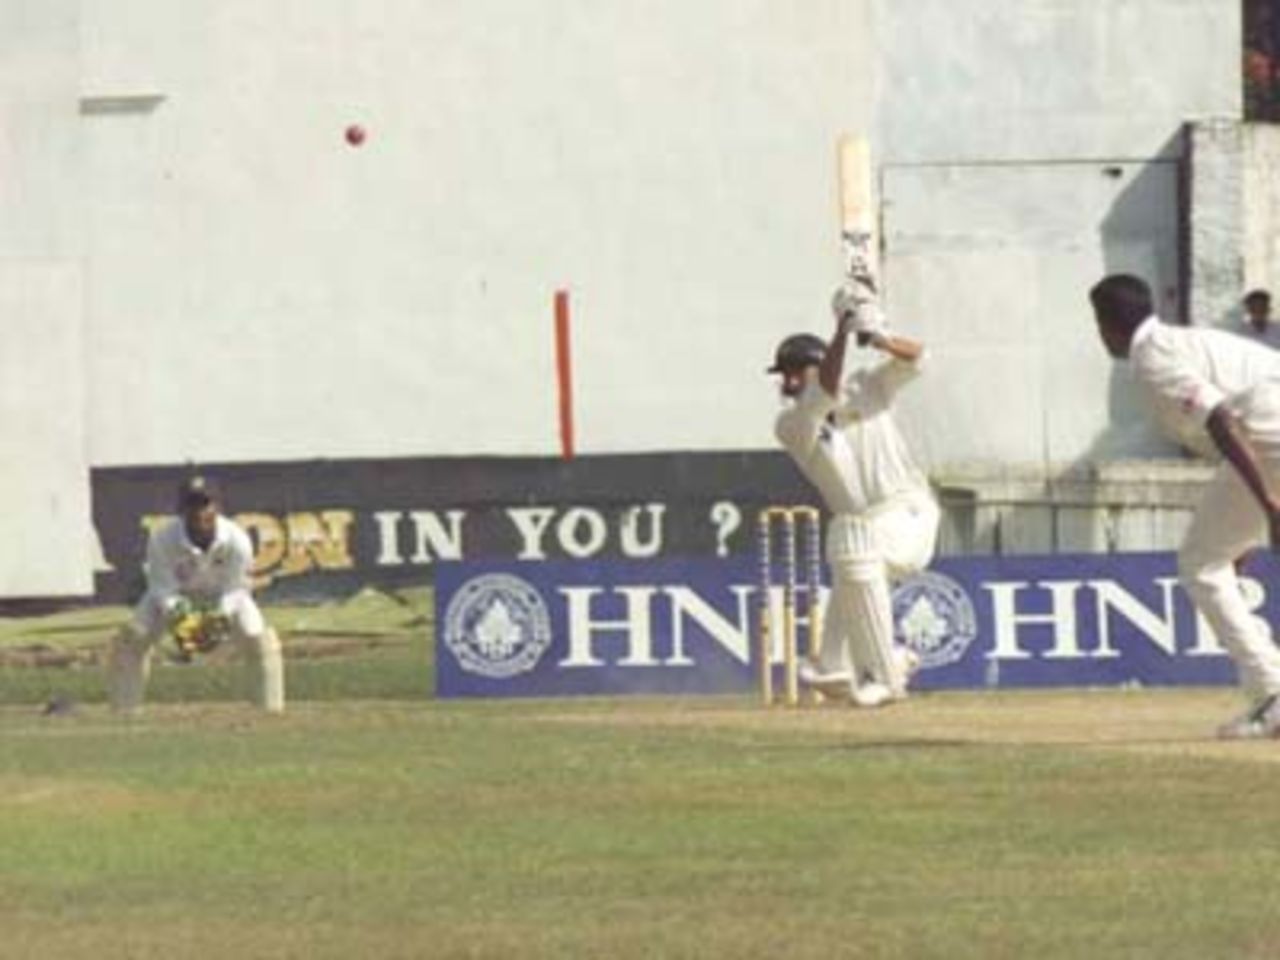 Younis Khan on the offensive on the second day of the First Test, 15 June, 2000. Pakistan in Sri Lanka, Sinhalese Sports Club Ground, Colombo, 14-18 June 2000